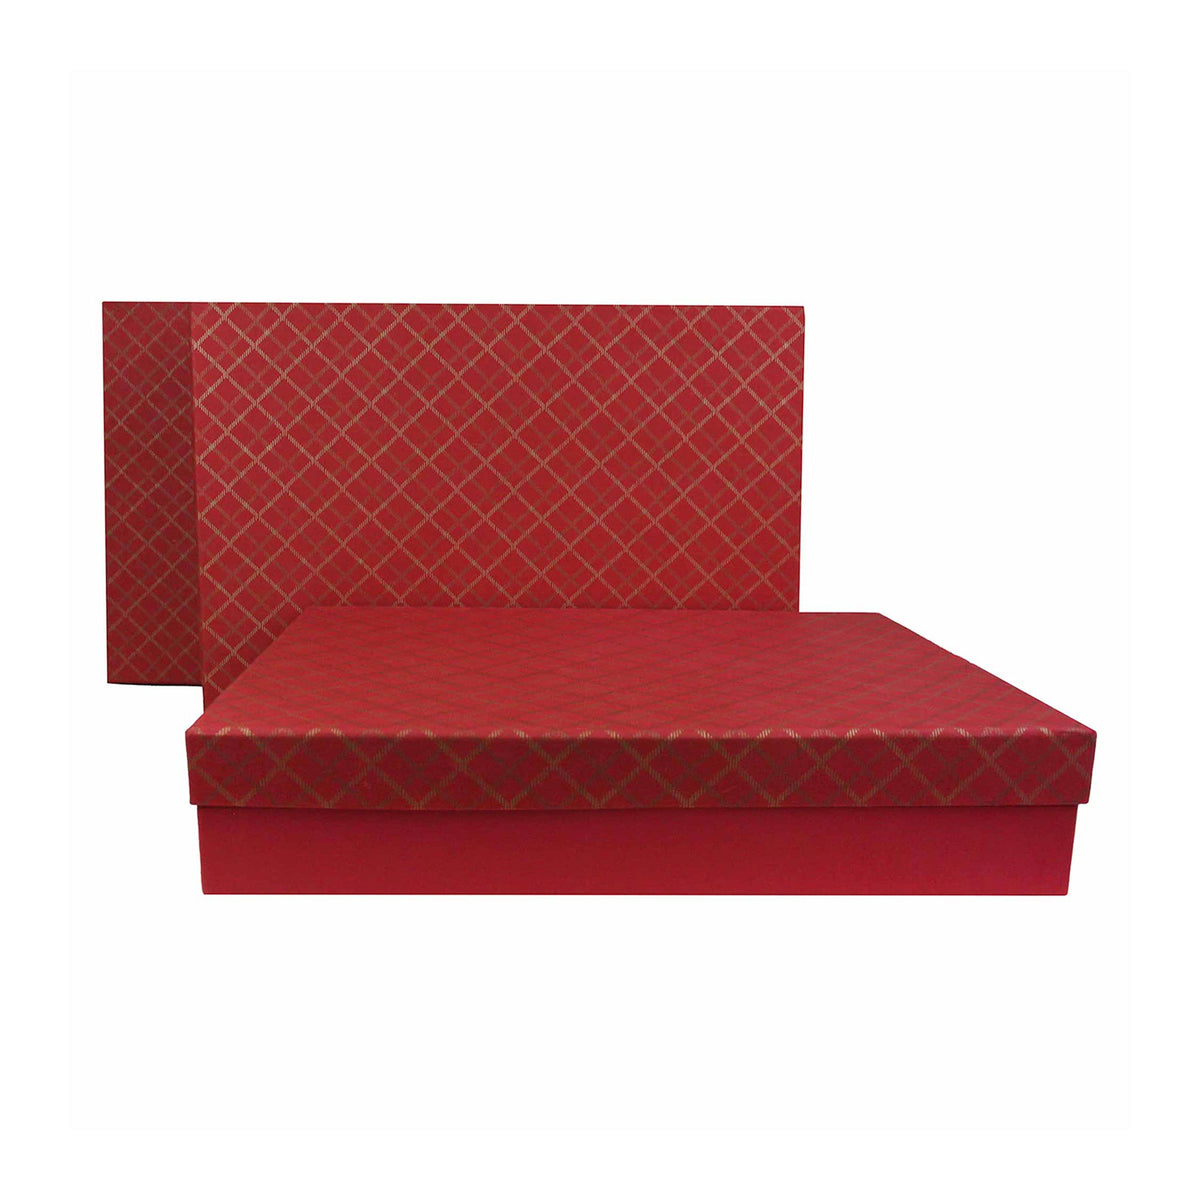 Set of 3 Handmade Red Chequered Gift Boxes